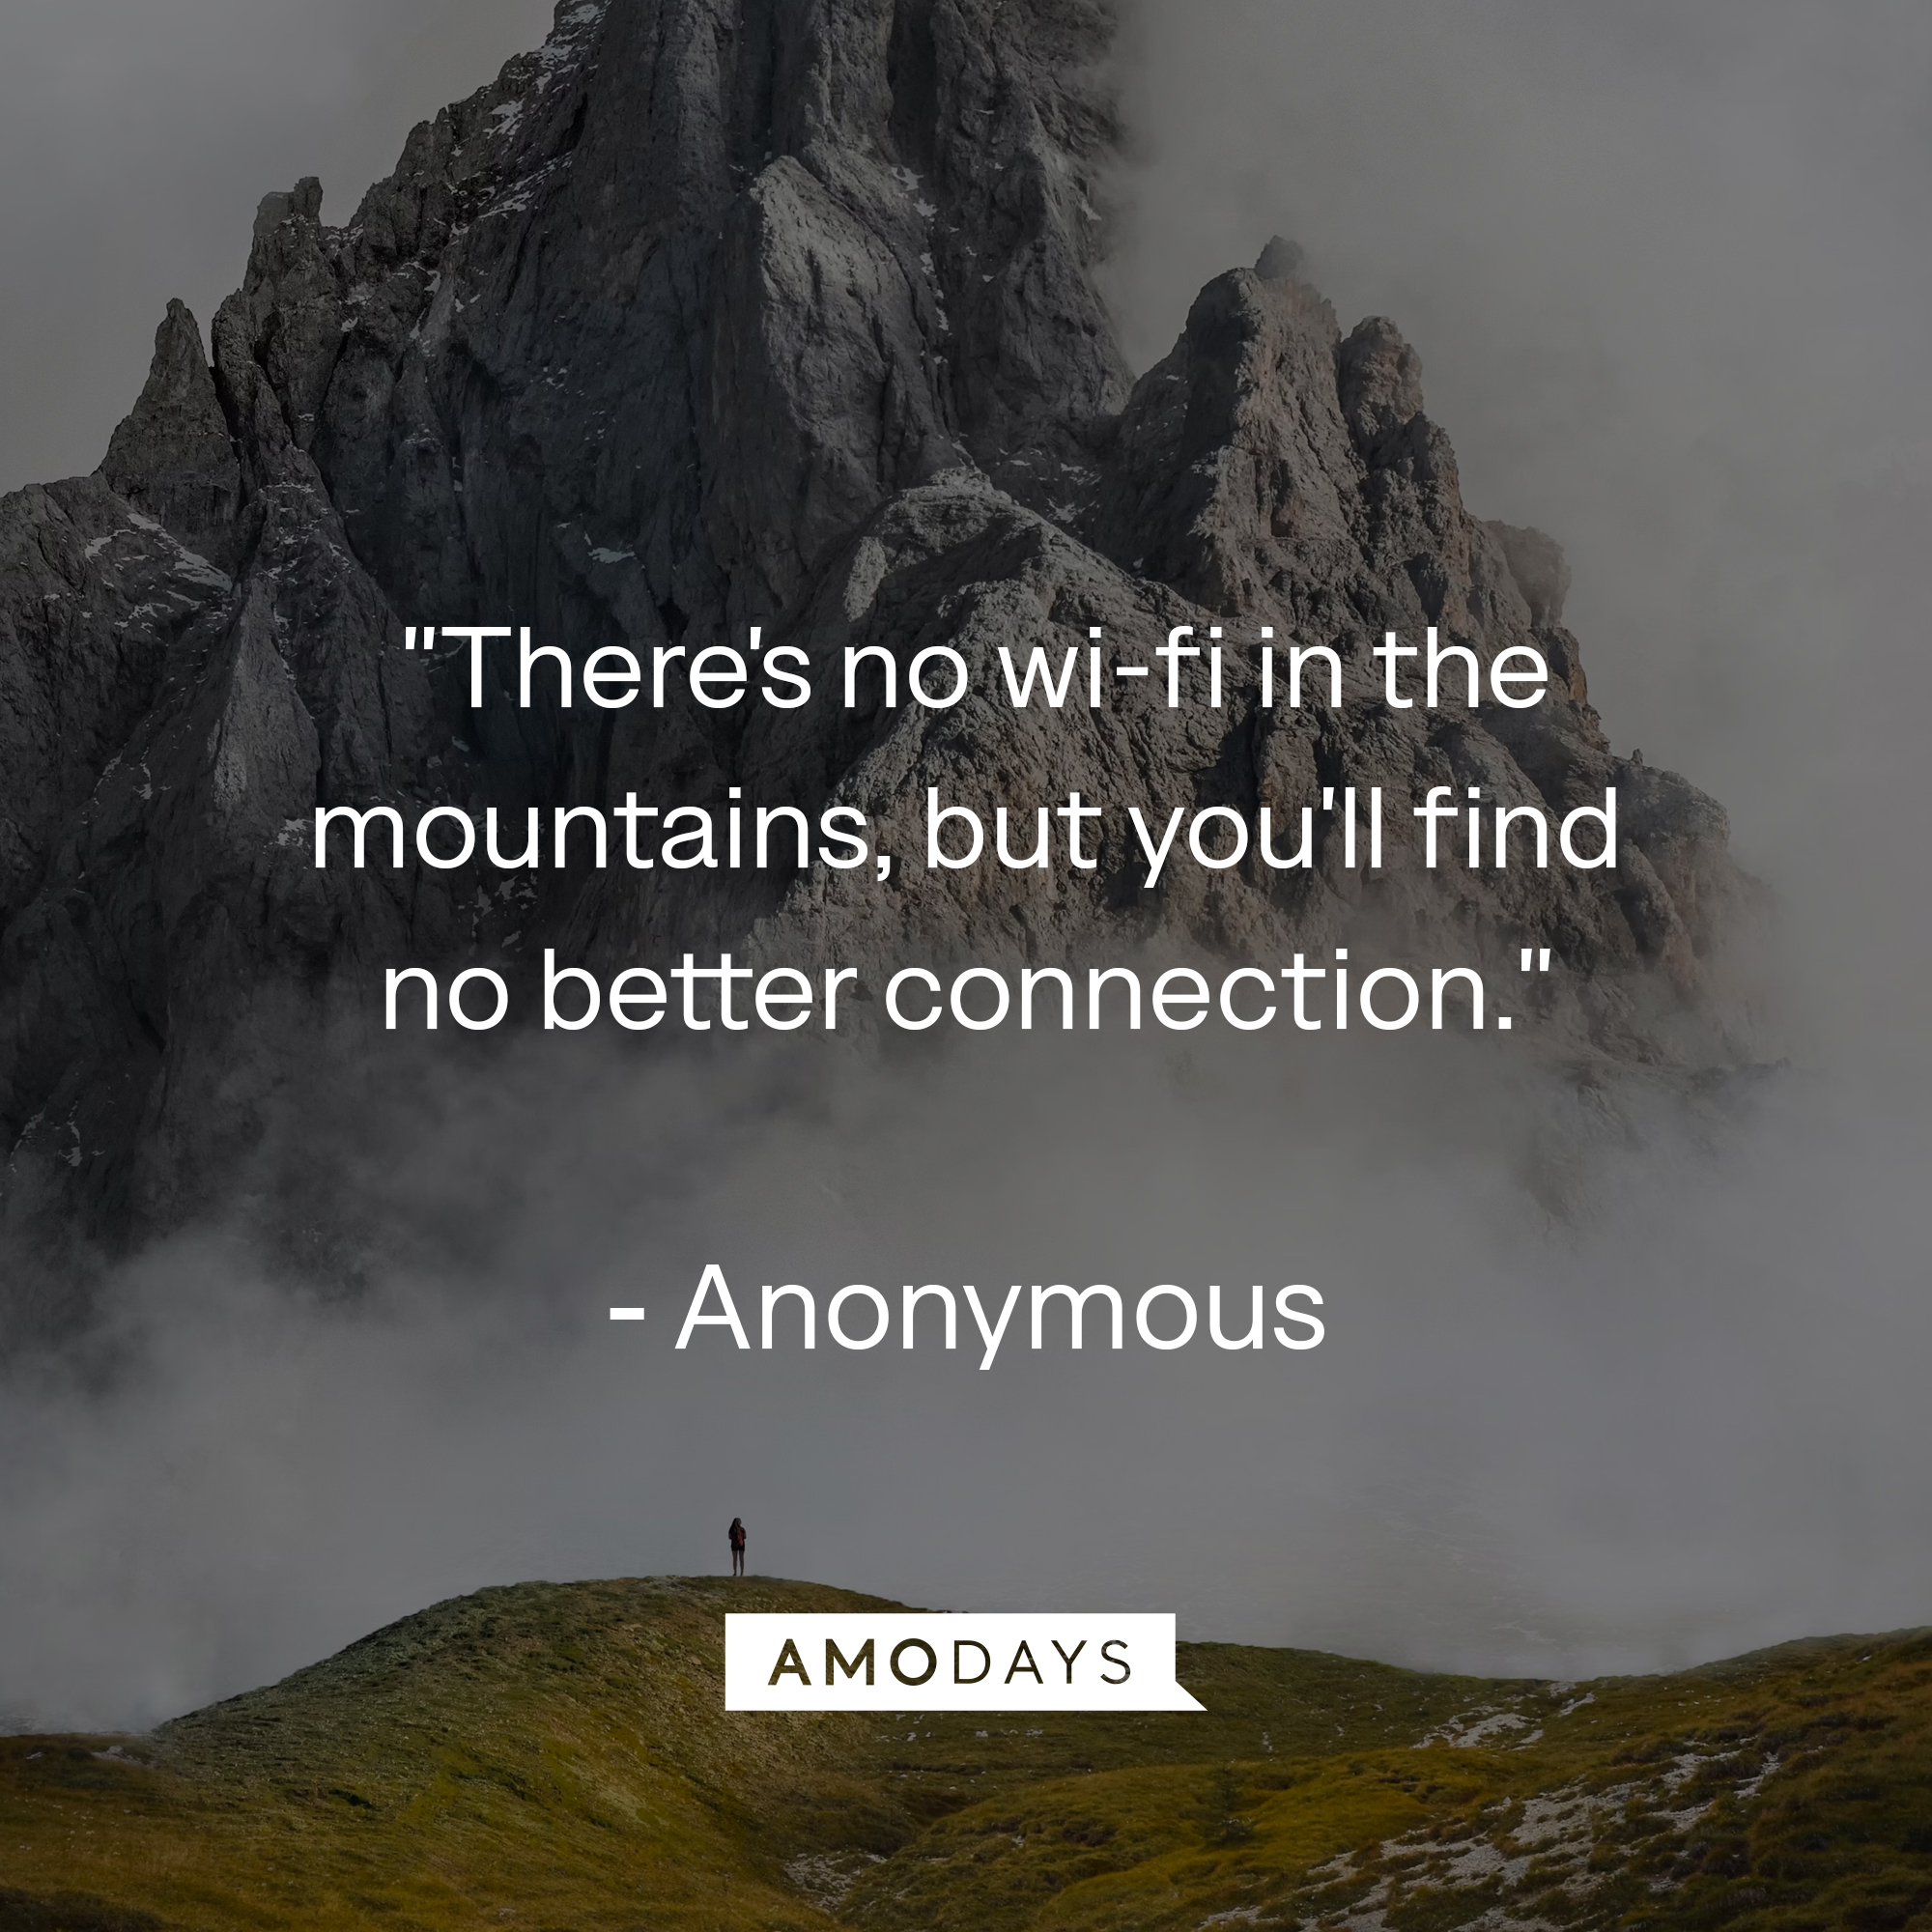 Anonymous quote: "There's no wi-fi in the mountains, but you'll find no better connection." Source: Countryliving